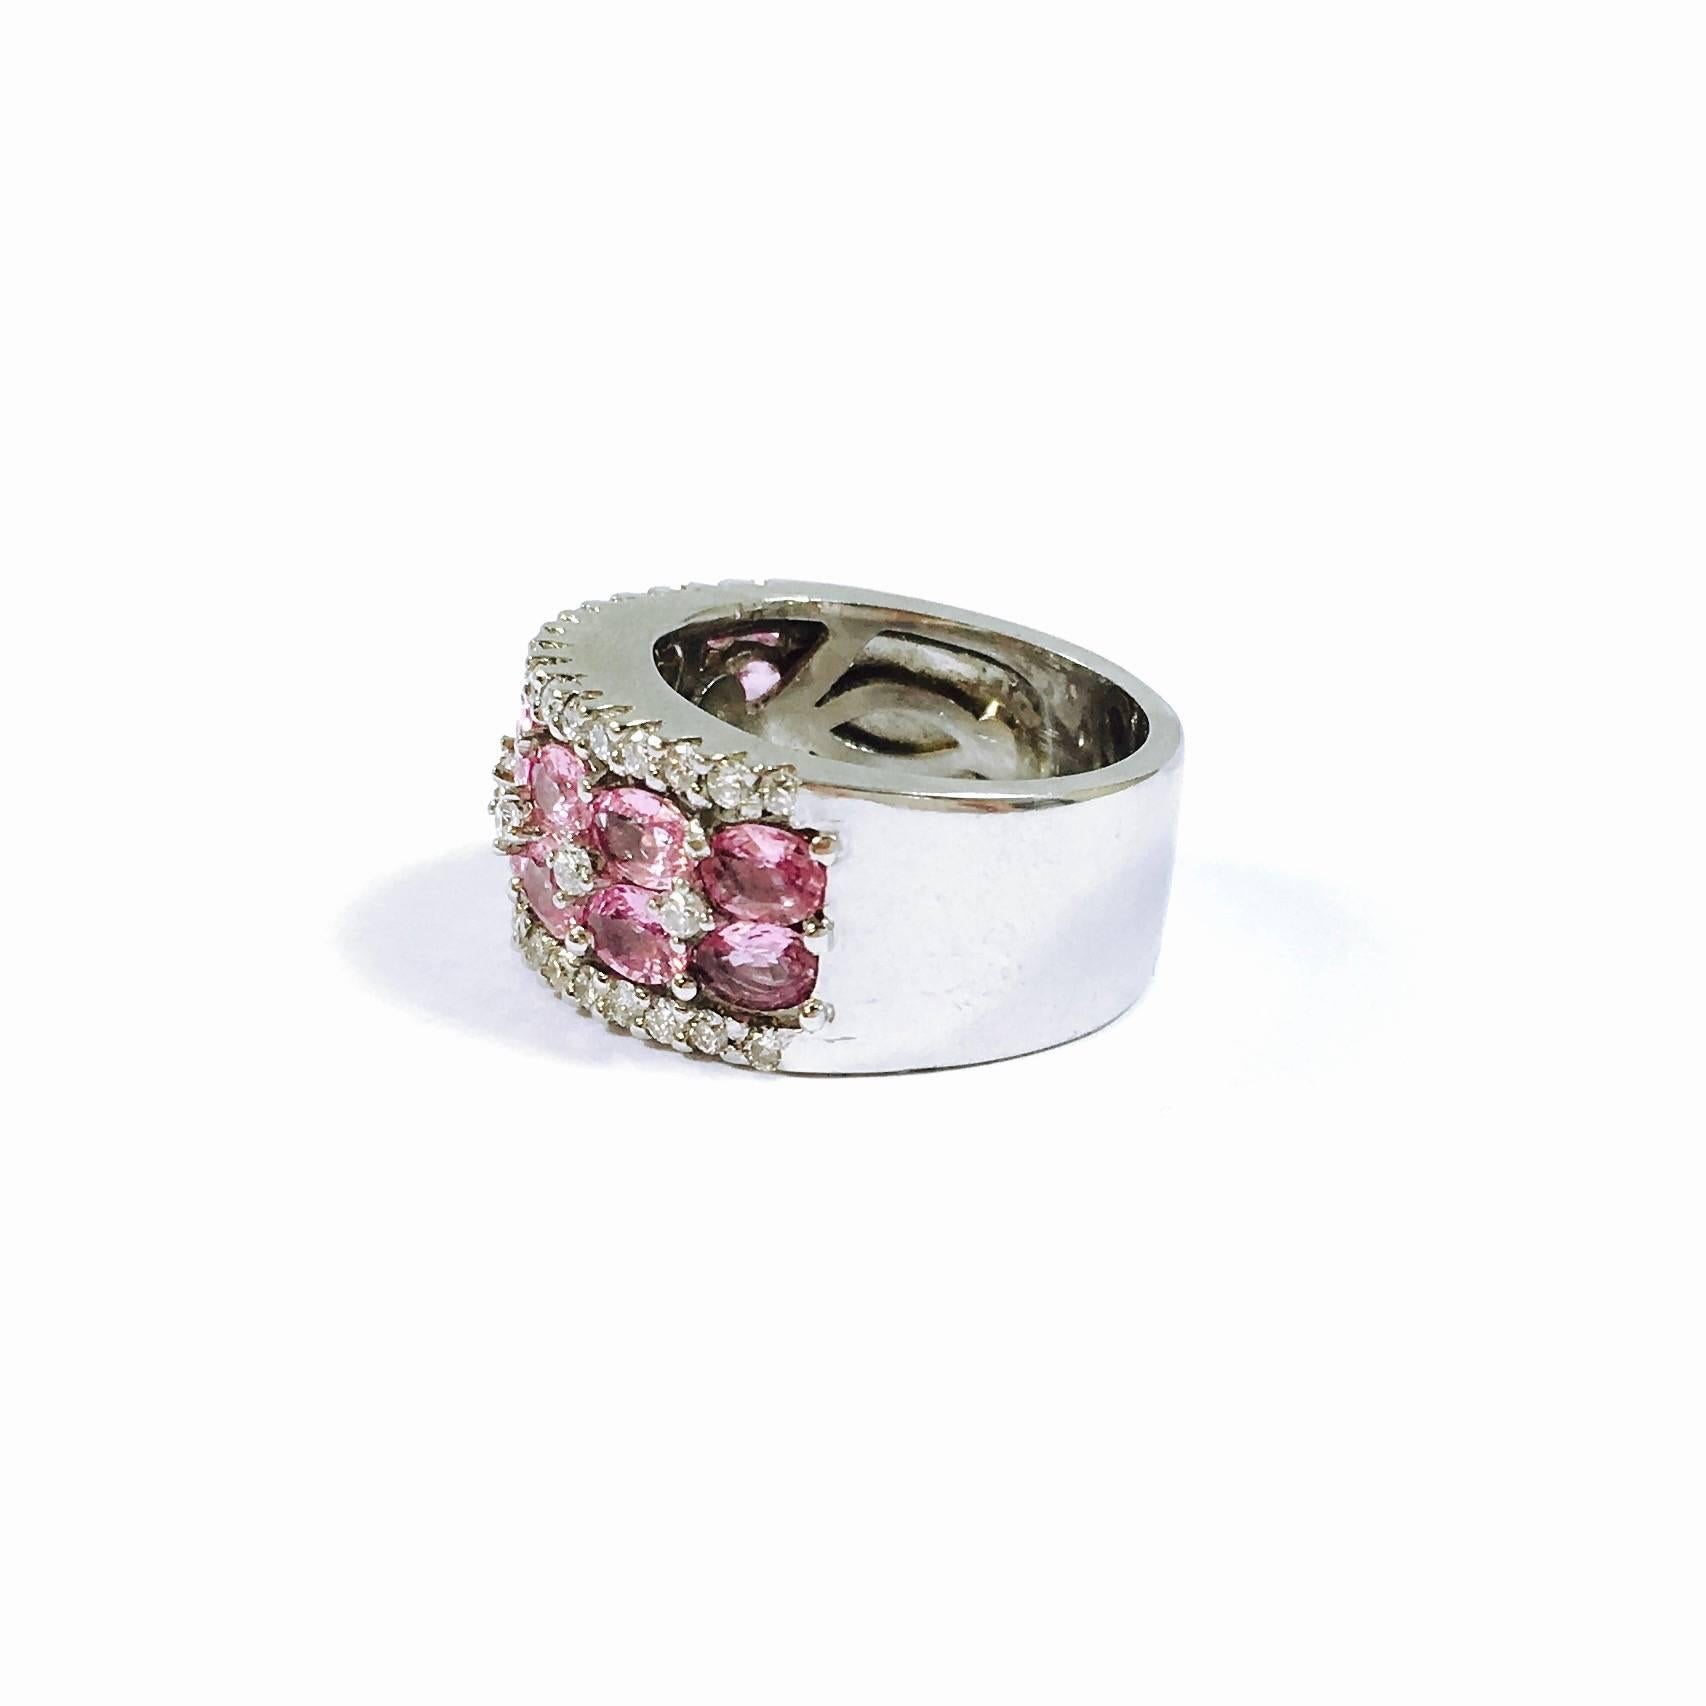 18K white gold 10mm wide band, featuring on the fron two rows of oval cut pink sapphires framed by diamonds. 
14 pink sapphire, exact total weight: 2.52ct (Stamped inside the shank.)
40 round brilliant cut diamonds, exact total weight: 0.53ct